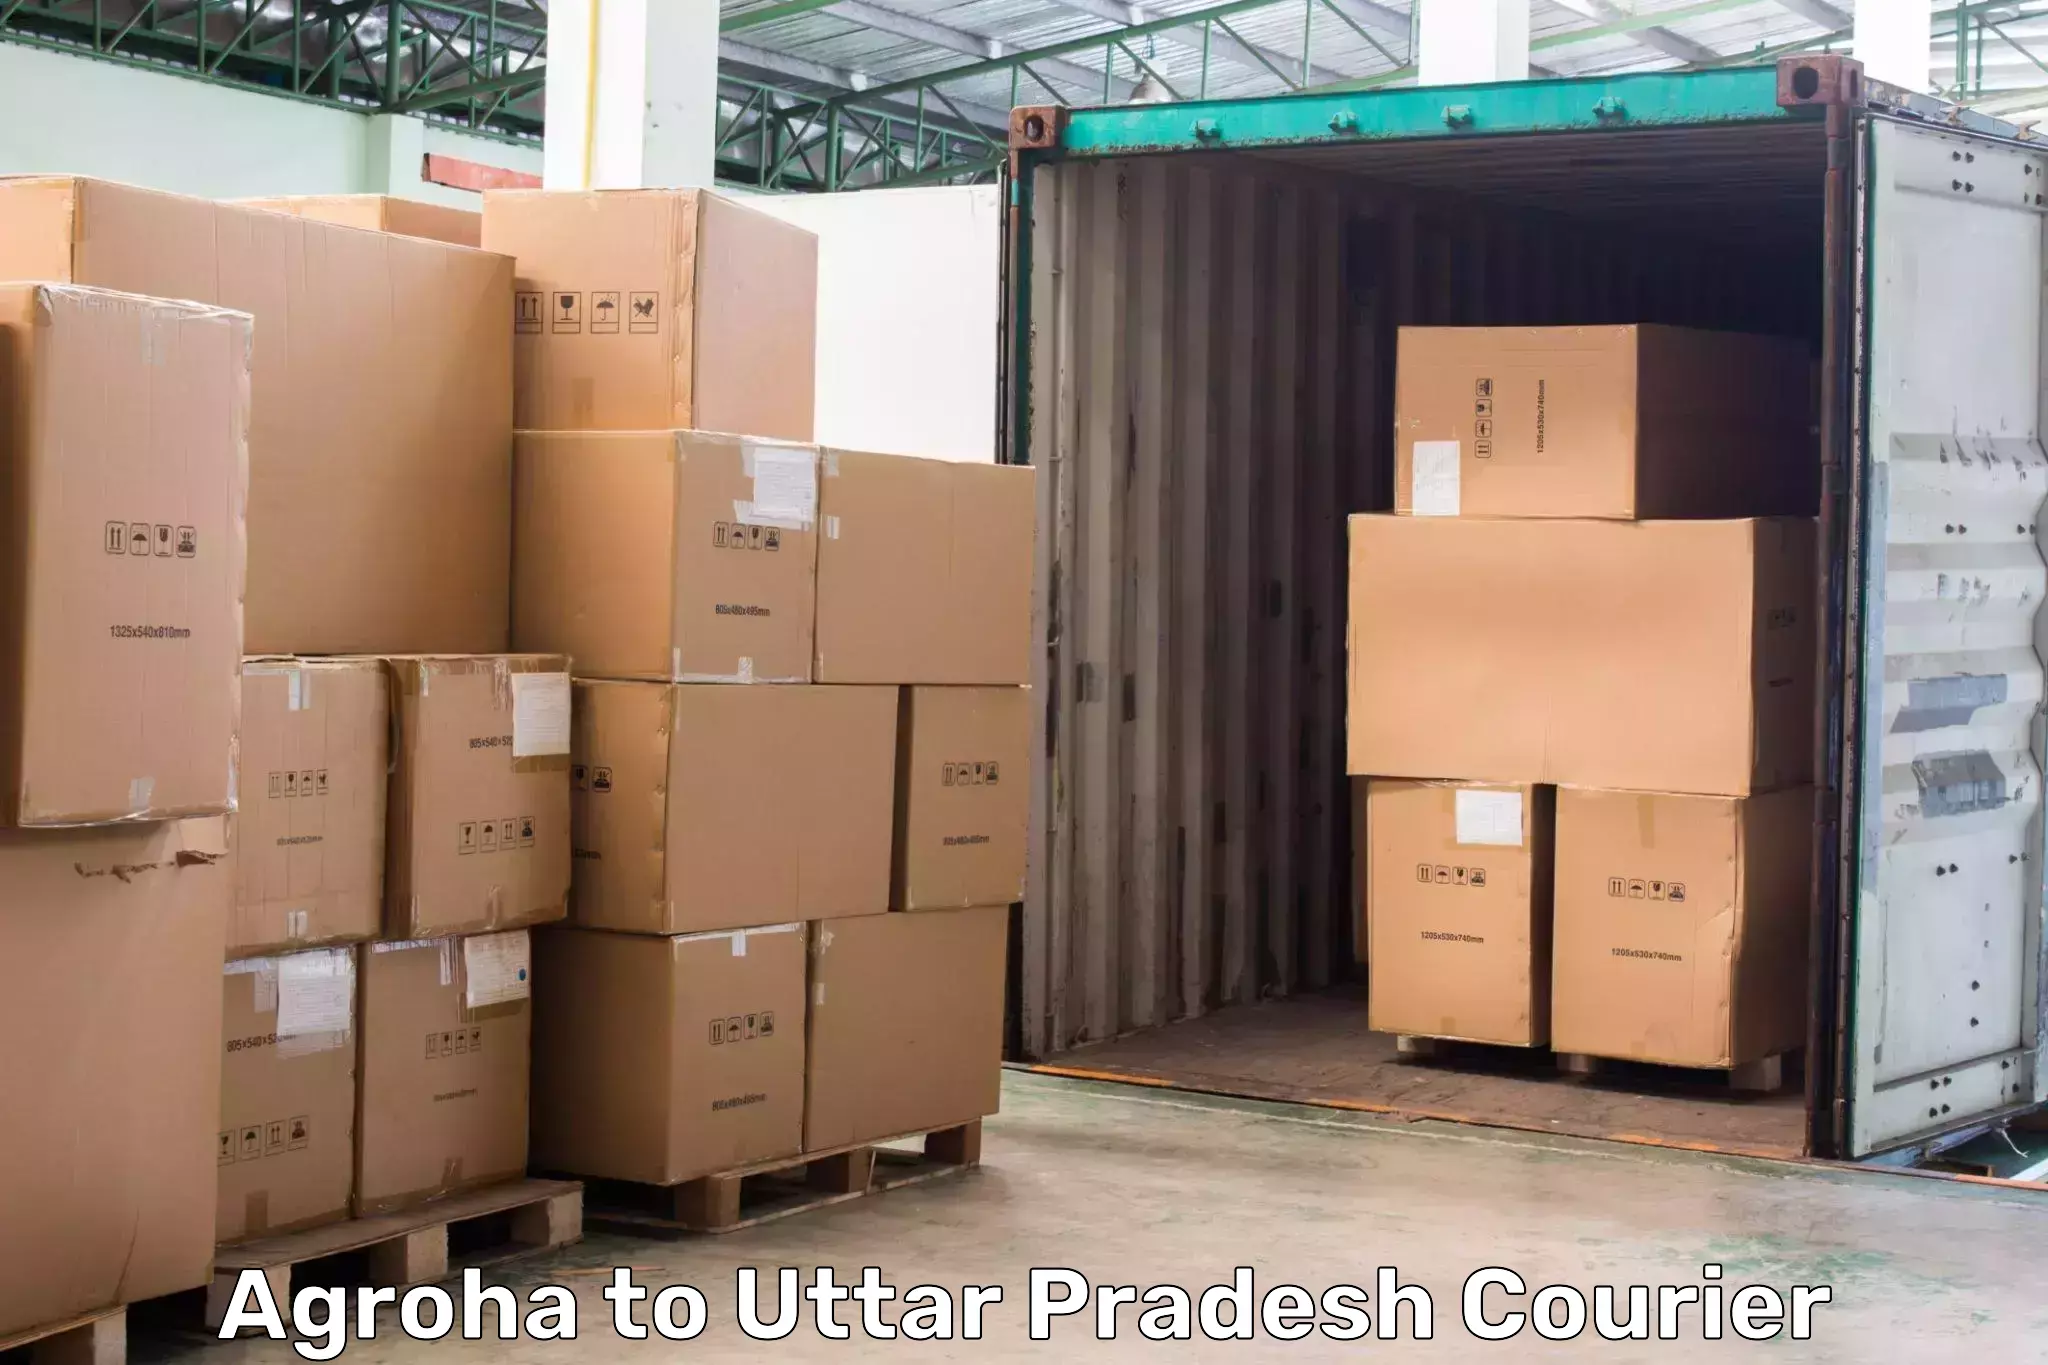 Express package transport Agroha to Bacchawaran